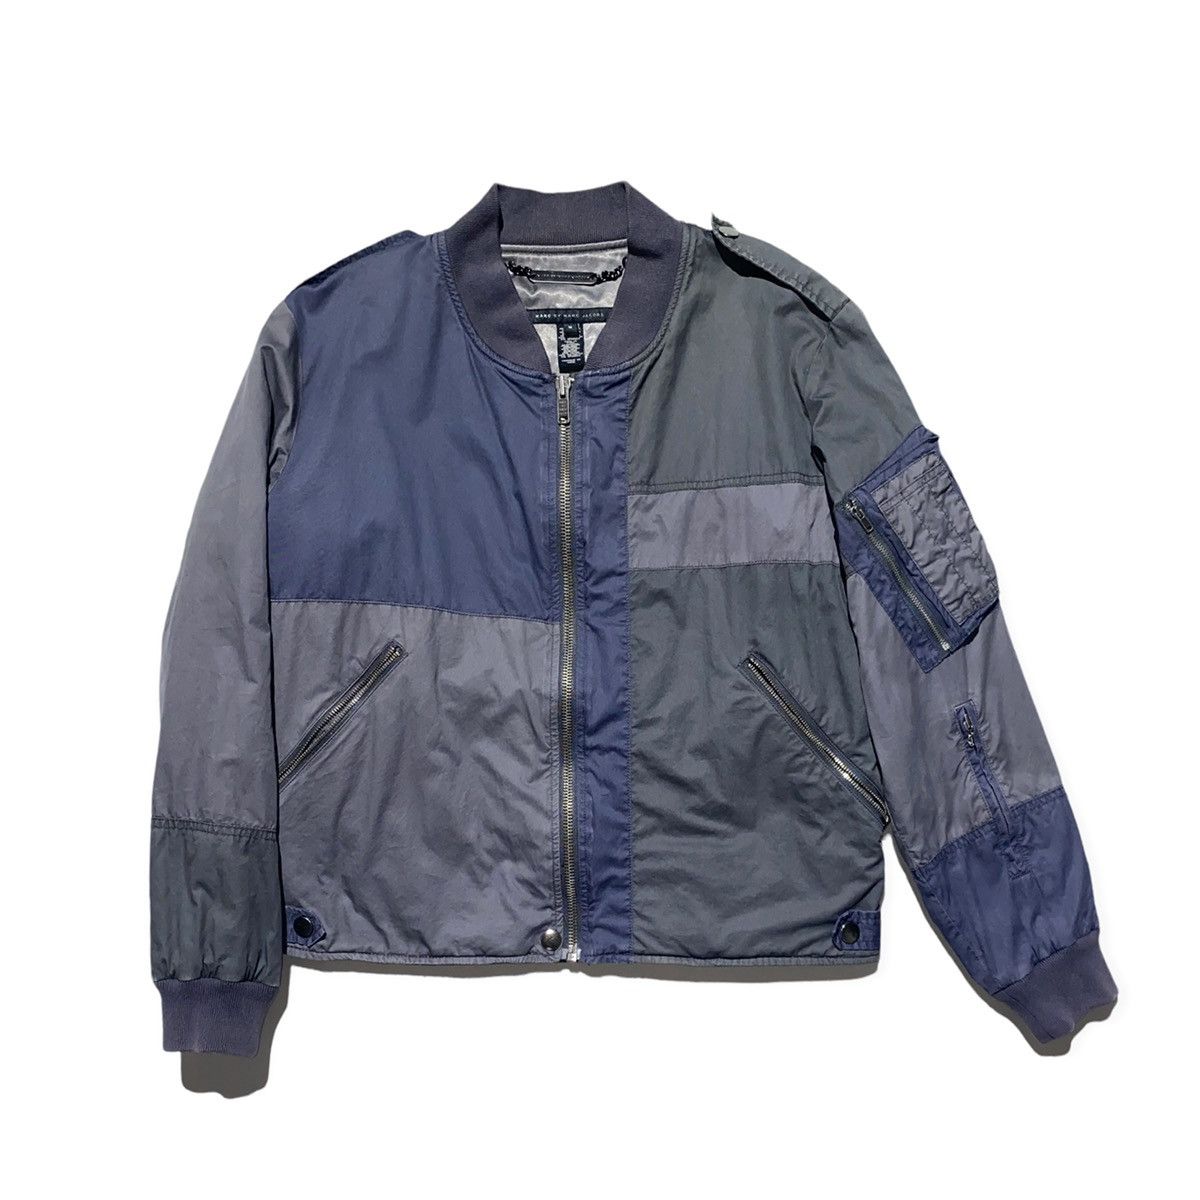 Marc Jacobs Patchwork multi zip bomber | Grailed